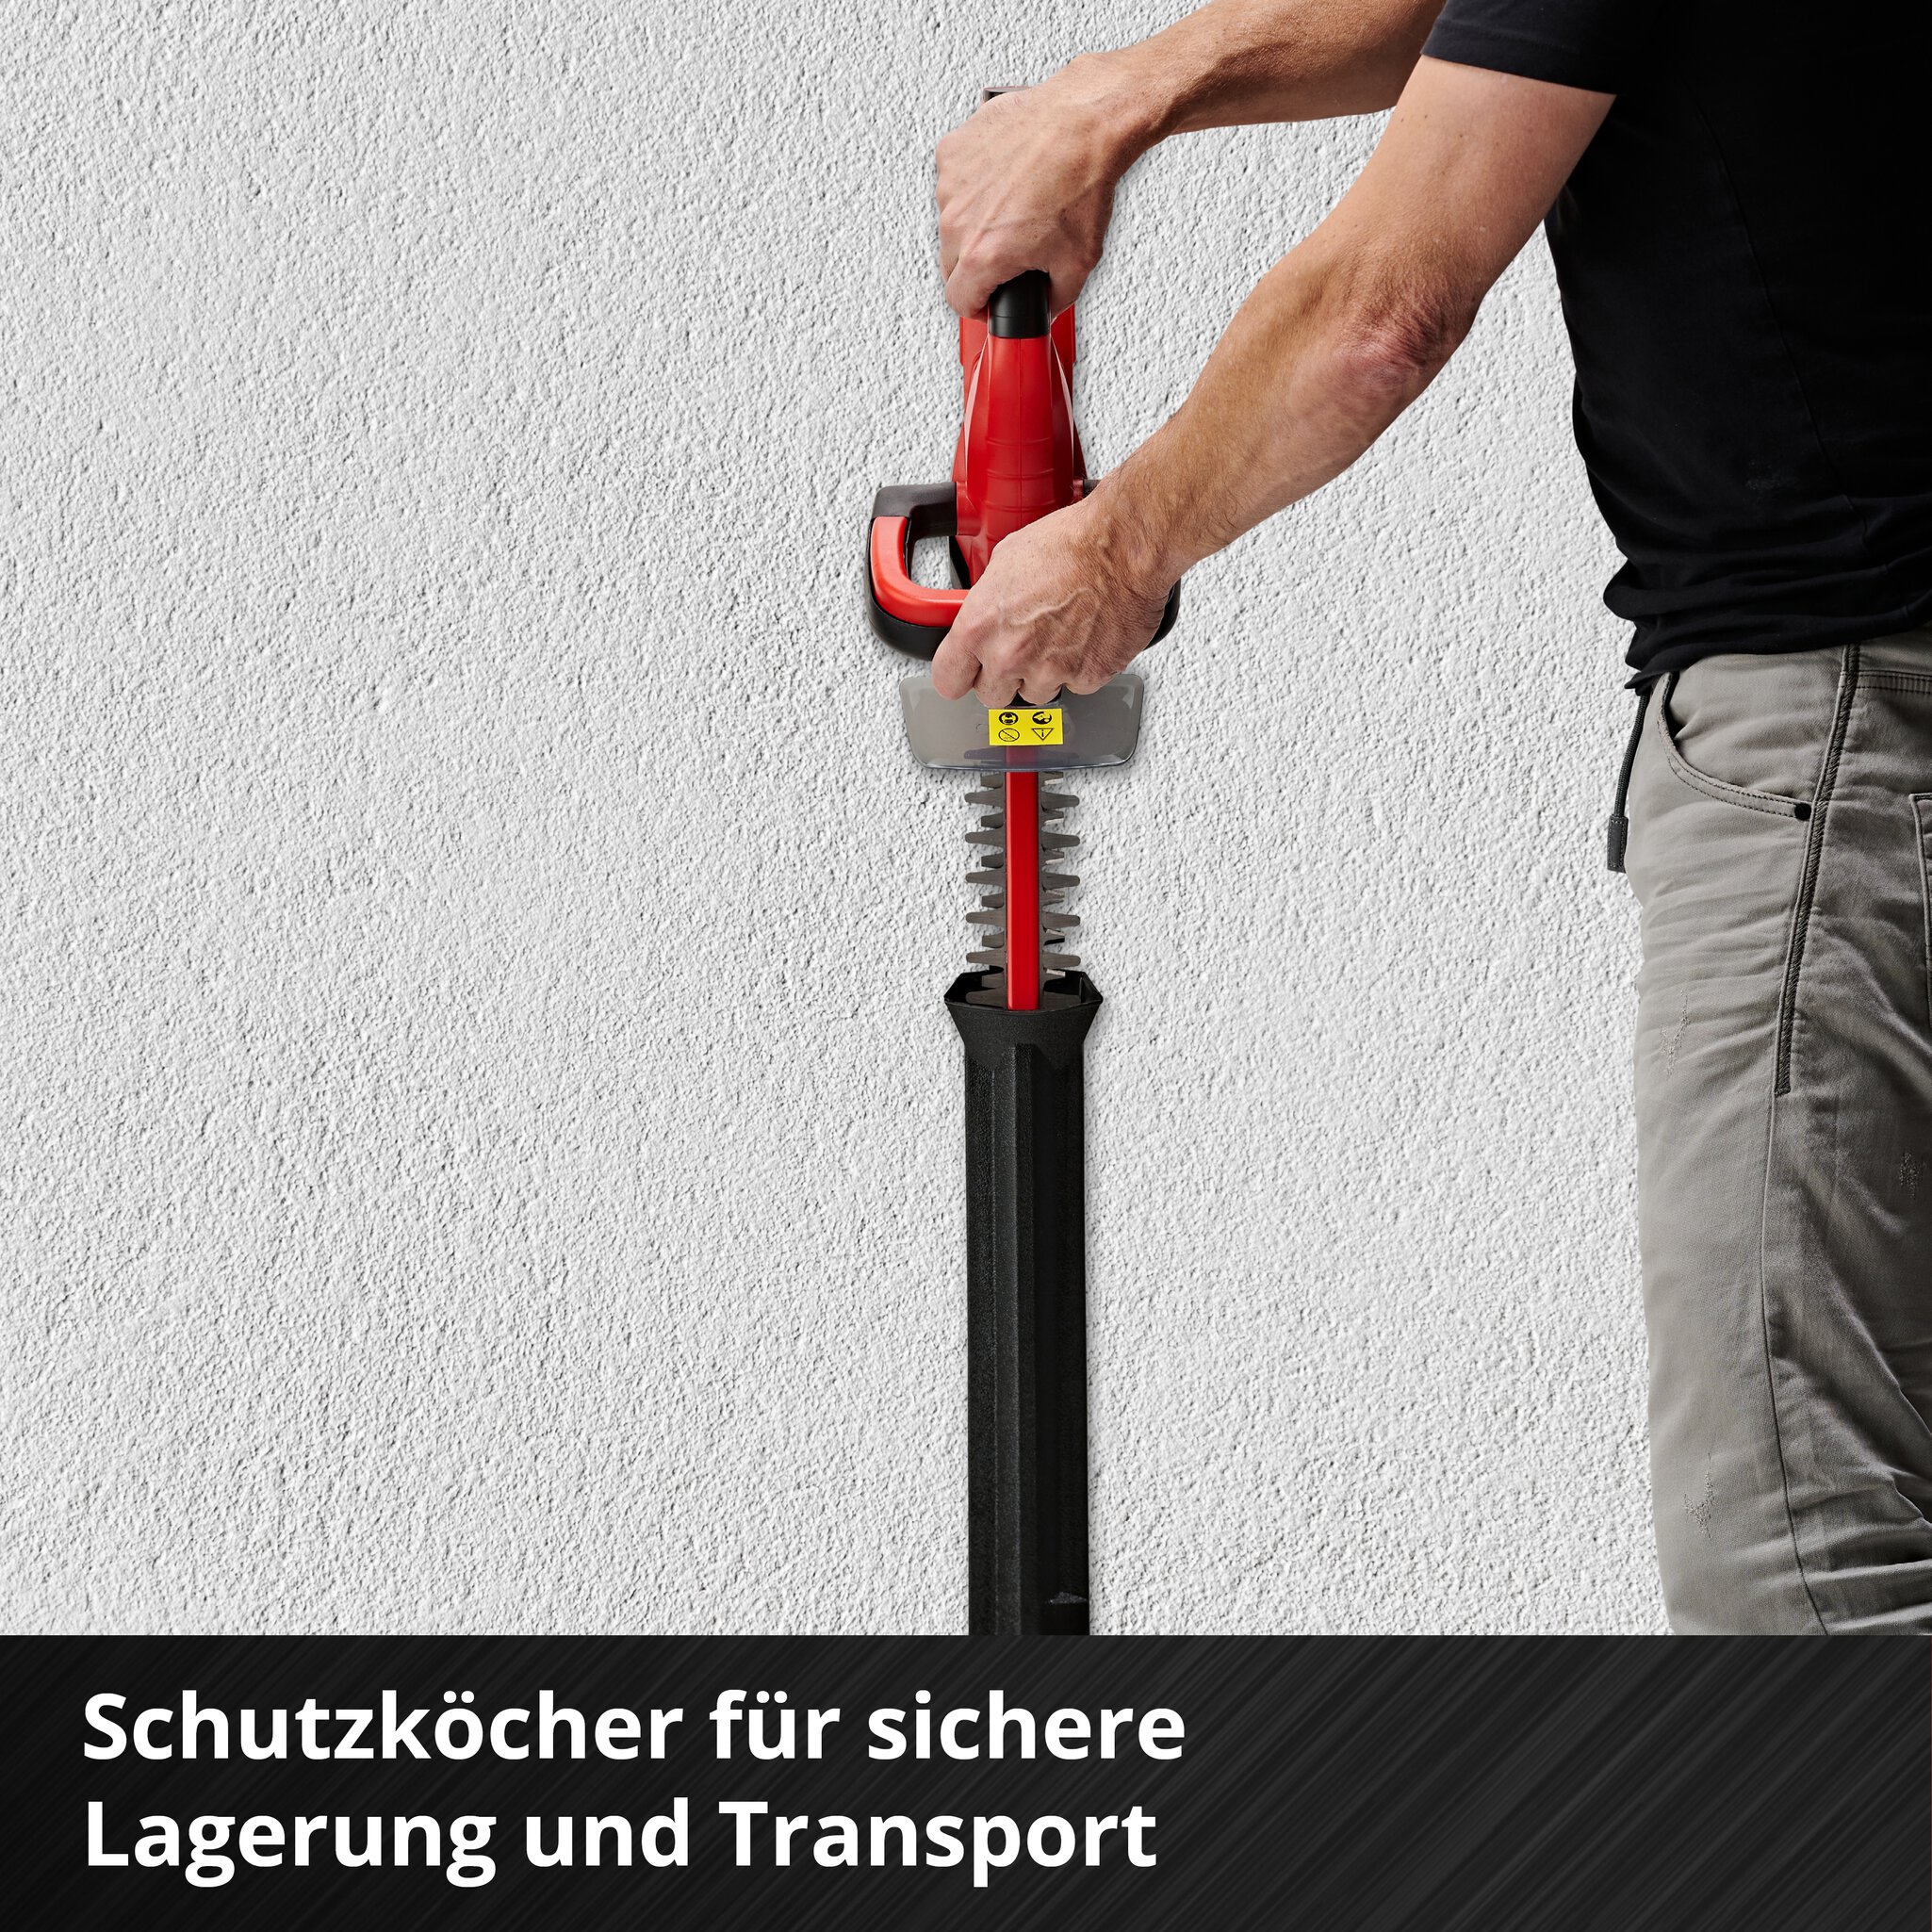 einhell-classic-cordless-hedge-trimmer-3410683-detail_image-002